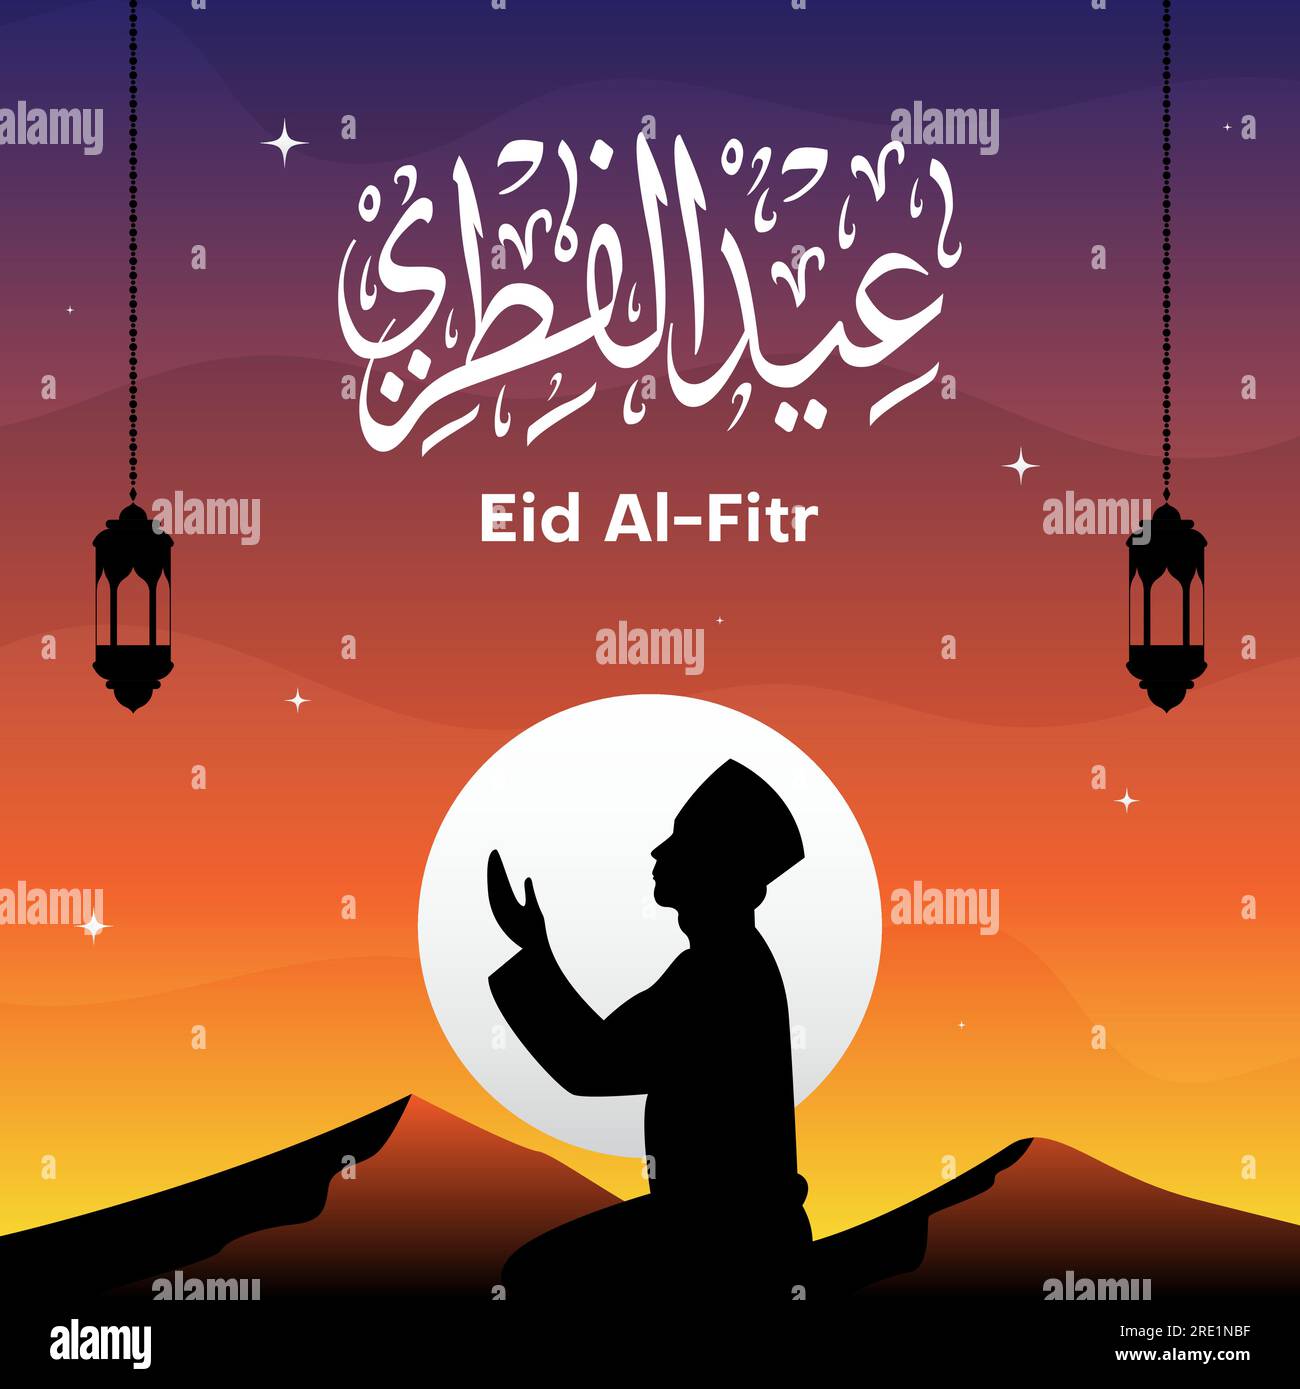 Eid Al-Fitr social media post or greeting card with moon, lantern,silhouette of a person praying and arabic calligraphy. vector illustration Stock Vector